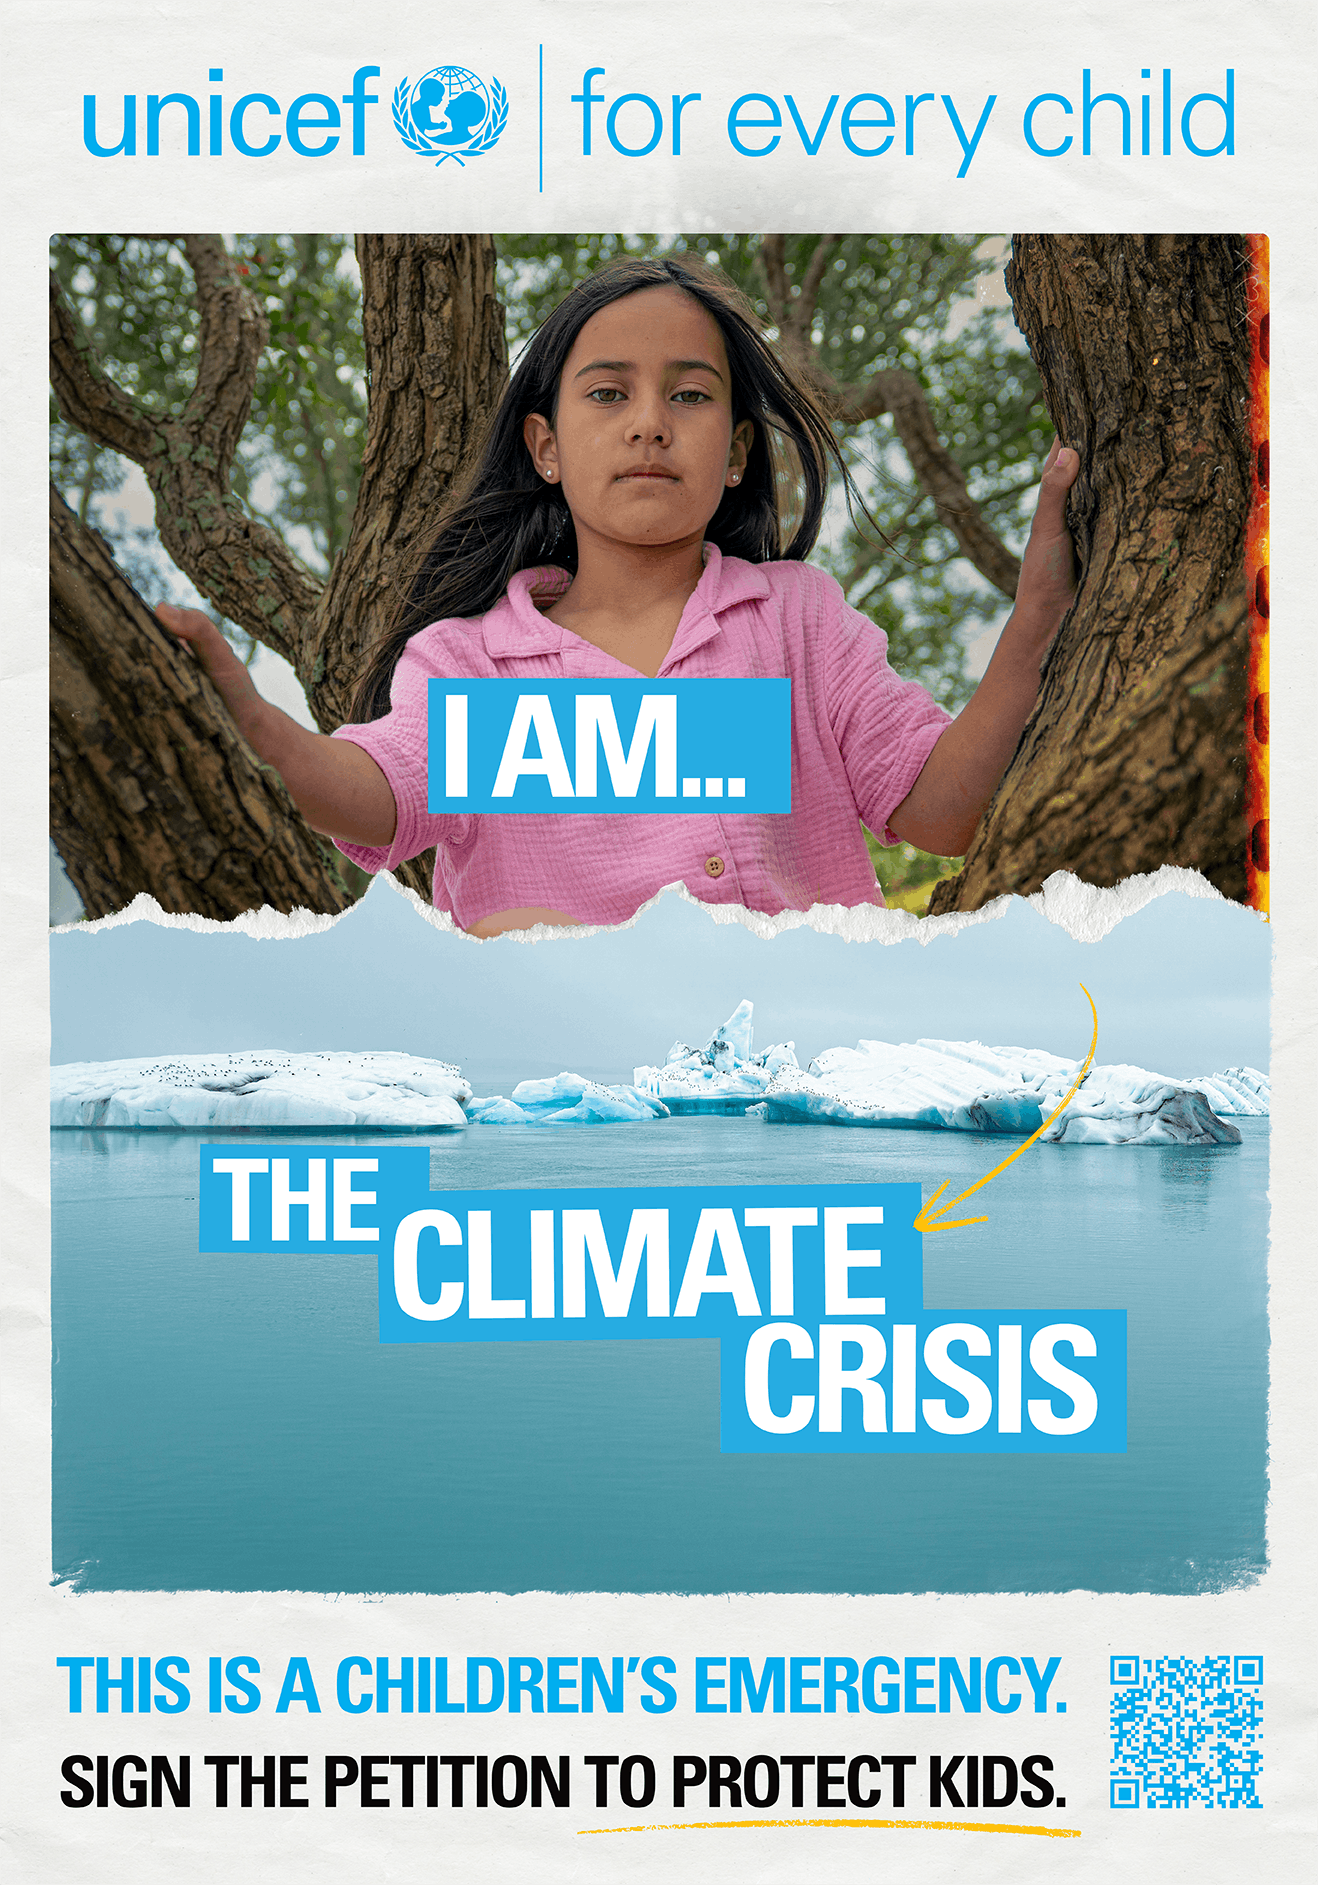 I am The Climate Crisis, This is a children's emergency. Sign the petition to protect kids.